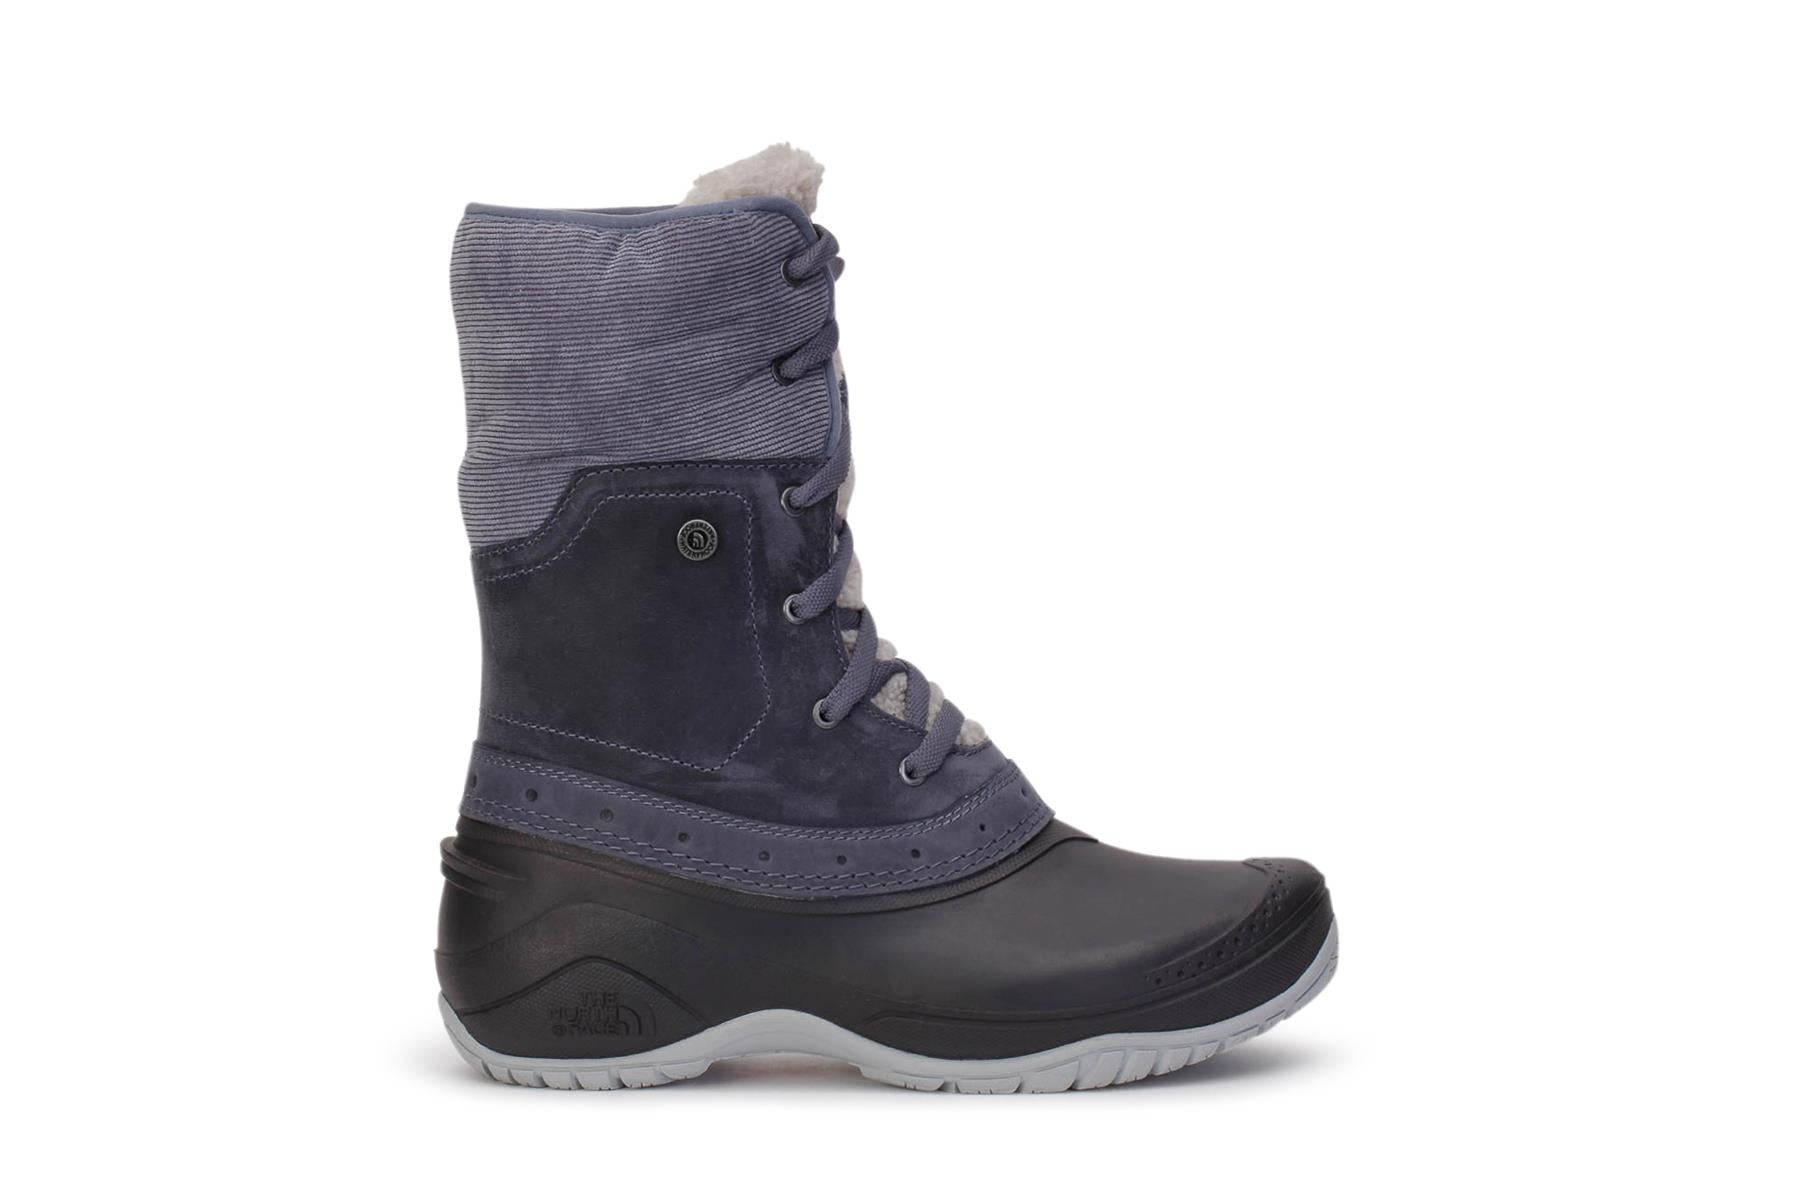 the-north-face-womens-shellista-roll-down-wp-boots-grisaille-grey-weathered-black-main